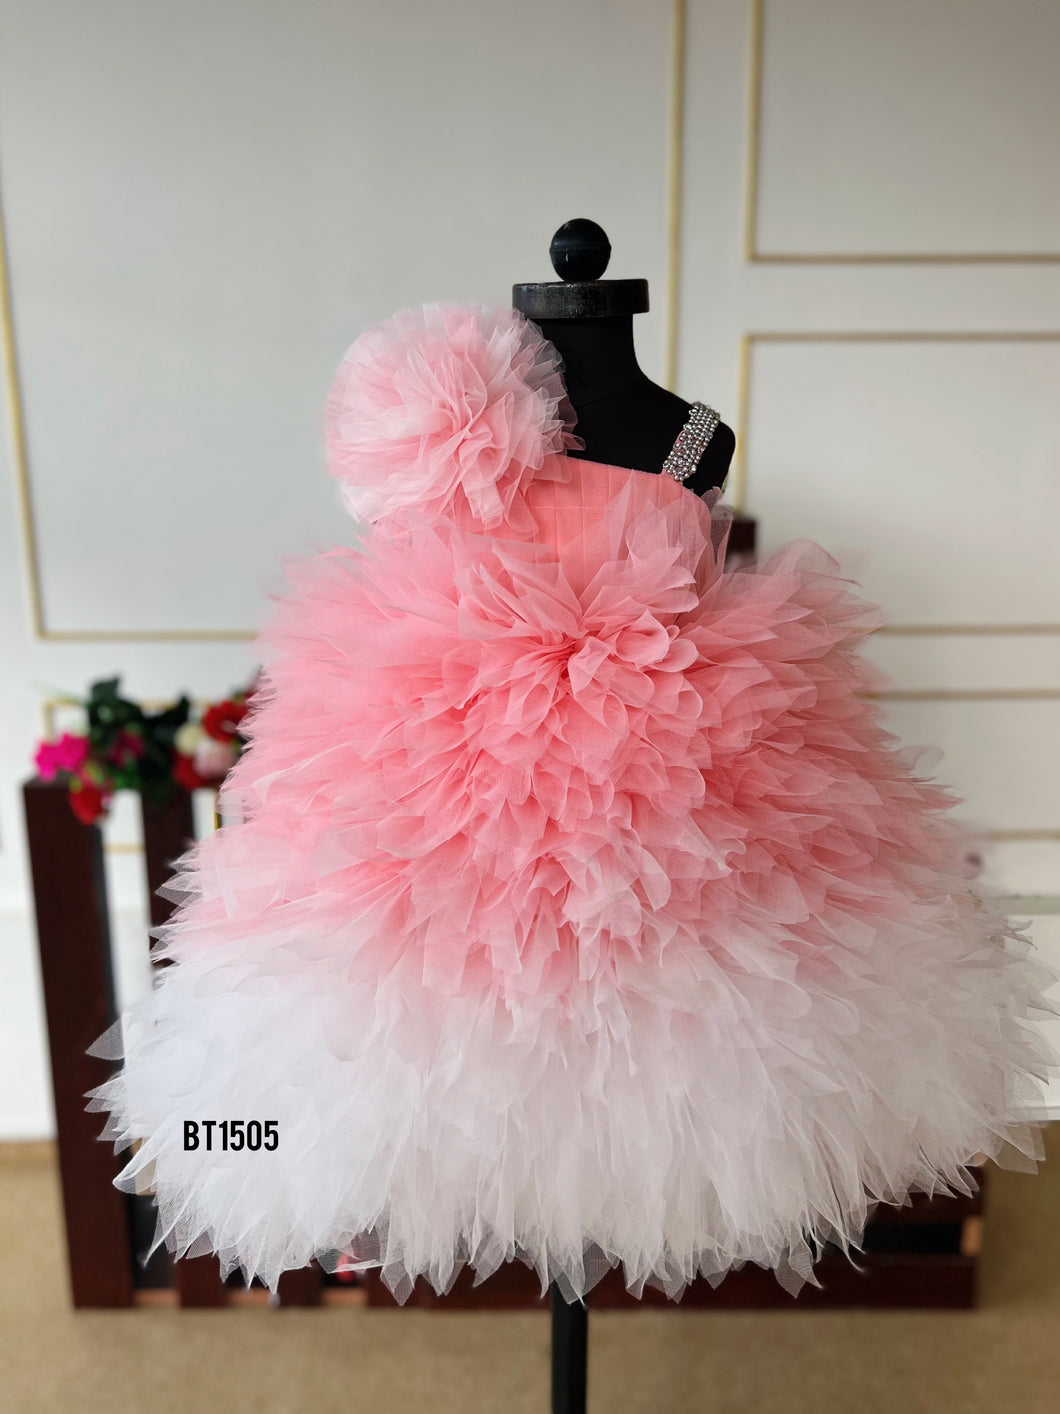 BT1505 Cotton Candy Dreams Dress - A Sprinkle of Sparkle and Sweetness